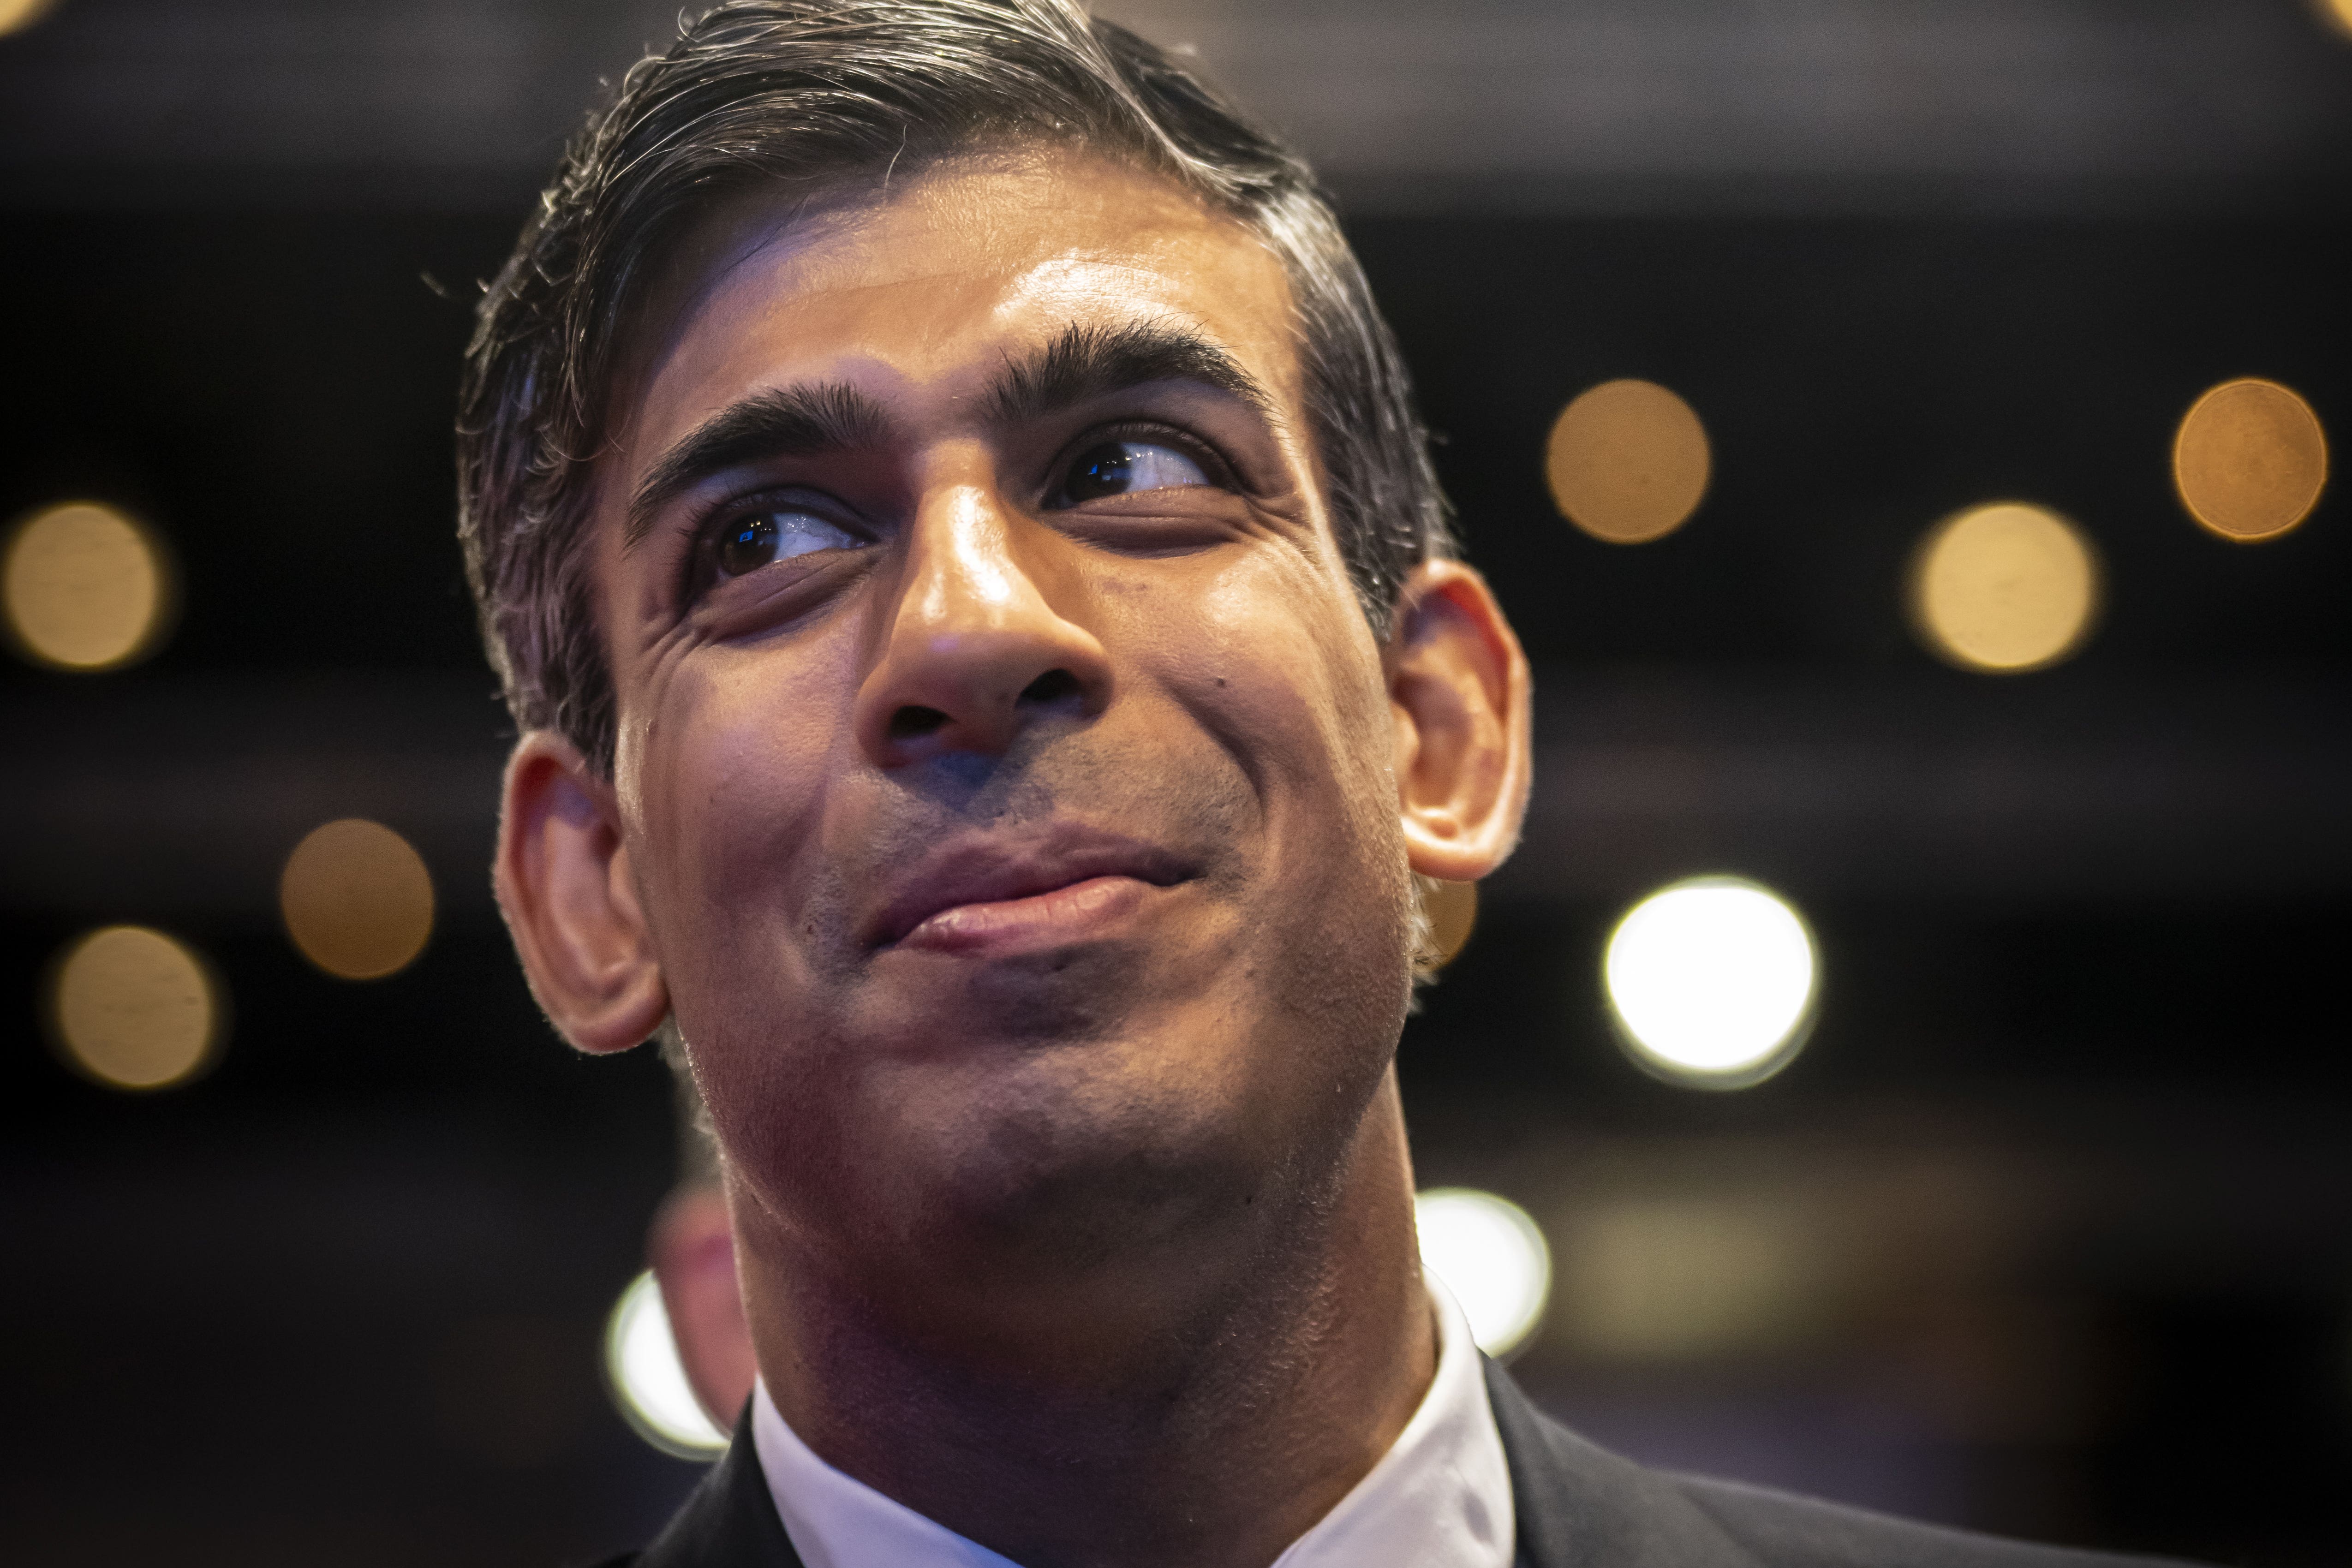 Rishi Sunak held his first Tory party conference as leader (Danny Lawson/PA)